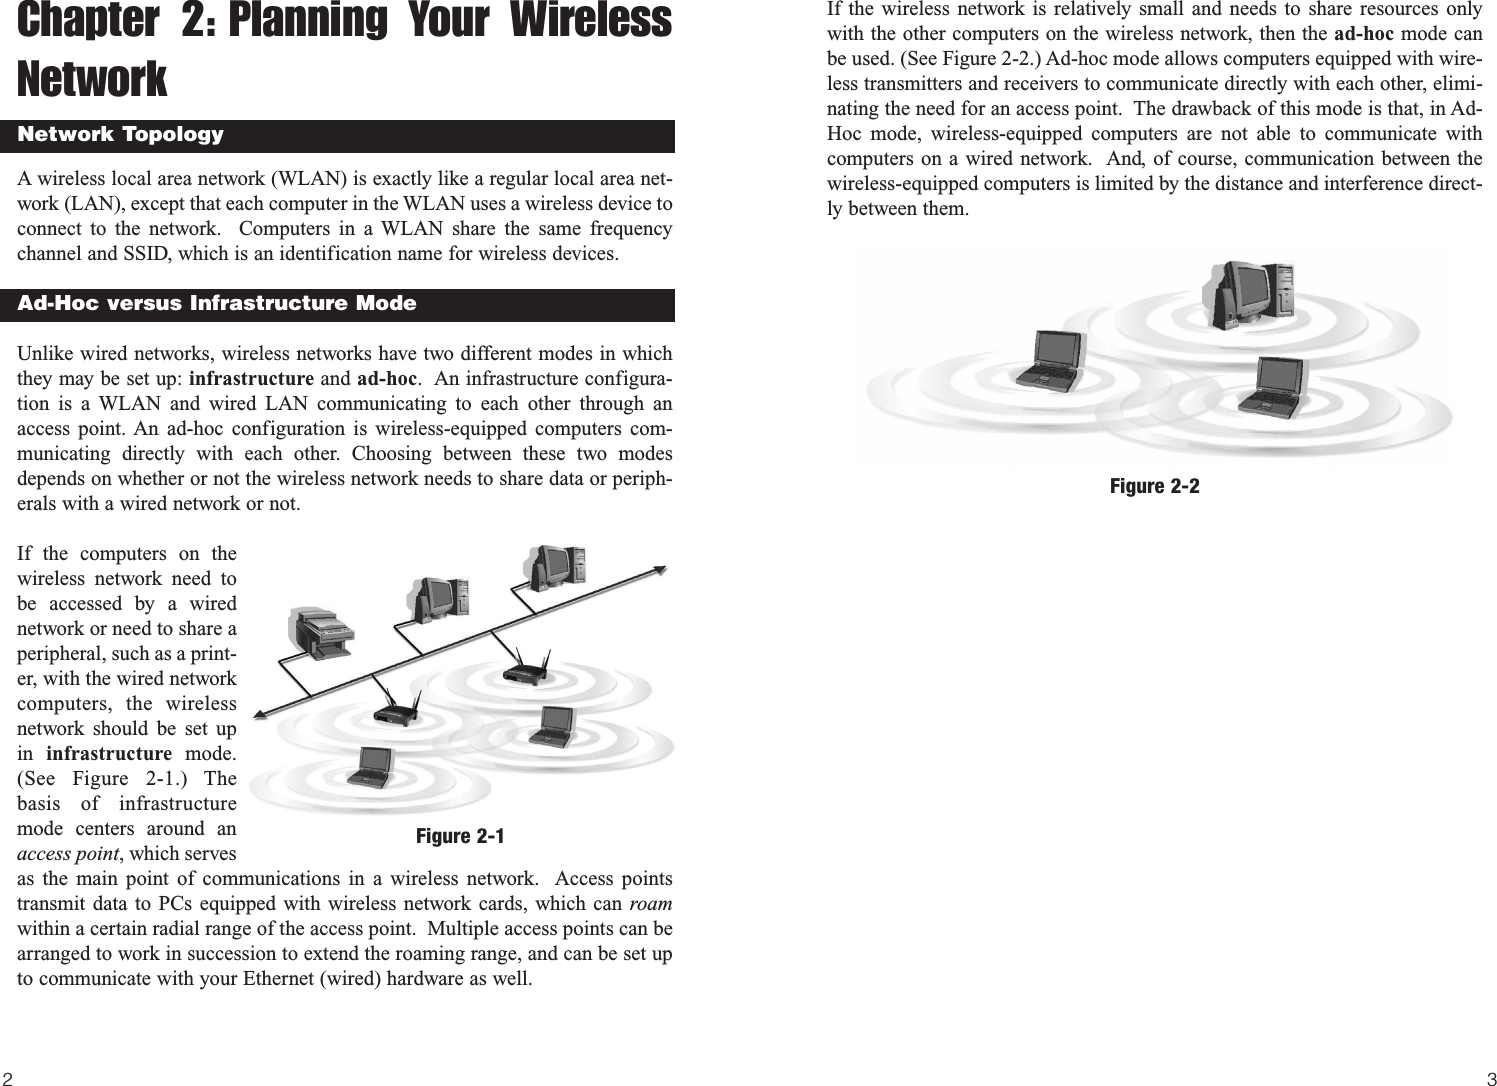 If the wireless network is relatively small and needs to share resources onlywith the other computers on the wireless network, then the ad-hoc mode canbe used. (See Figure 2-2.) Ad-hoc mode allows computers equipped with wire-less transmitters and receivers to communicate directly with each other, elimi-nating the need for an access point.  The drawback of this mode is that, in Ad-Hoc mode, wireless-equipped computers are not able to communicate withcomputers on a wired network.  And, of course, communication between thewireless-equipped computers is limited by the distance and interference direct-ly between them.32Figure 2-2Chapter 2: Planning Your WirelessNetworkA wireless local area network (WLAN) is exactly like a regular local area net-work (LAN), except that each computer in the WLAN uses a wireless device toconnect to the network.  Computers in a WLAN share the same frequencychannel and SSID, which is an identification name for wireless devices.Unlike wired networks, wireless networks have two different modes in whichthey may be set up: infrastructure and ad-hoc.  An infrastructure configura-tion is a WLAN and wired LAN communicating to each other through anaccess point. An ad-hoc configuration is wireless-equipped computers com-municating directly with each other. Choosing between these two modesdepends on whether or not the wireless network needs to share data or periph-erals with a wired network or not.If the computers on thewireless network need tobe accessed by a wirednetwork or need to share aperipheral, such as a print-er, with the wired networkcomputers, the wirelessnetwork should be set upin  infrastructure  mode.(See Figure 2-1.) Thebasis of infrastructuremode centers around anaccess point, which servesas the main point of communications in a wireless network.  Access pointstransmit data to PCs equipped with wireless network cards, which can roamwithin a certain radial range of the access point.  Multiple access points can bearranged to work in succession to extend the roaming range, and can be set upto communicate with your Ethernet (wired) hardware as well. Network TopologyAd-Hoc versus Infrastructure ModeFigure 2-1